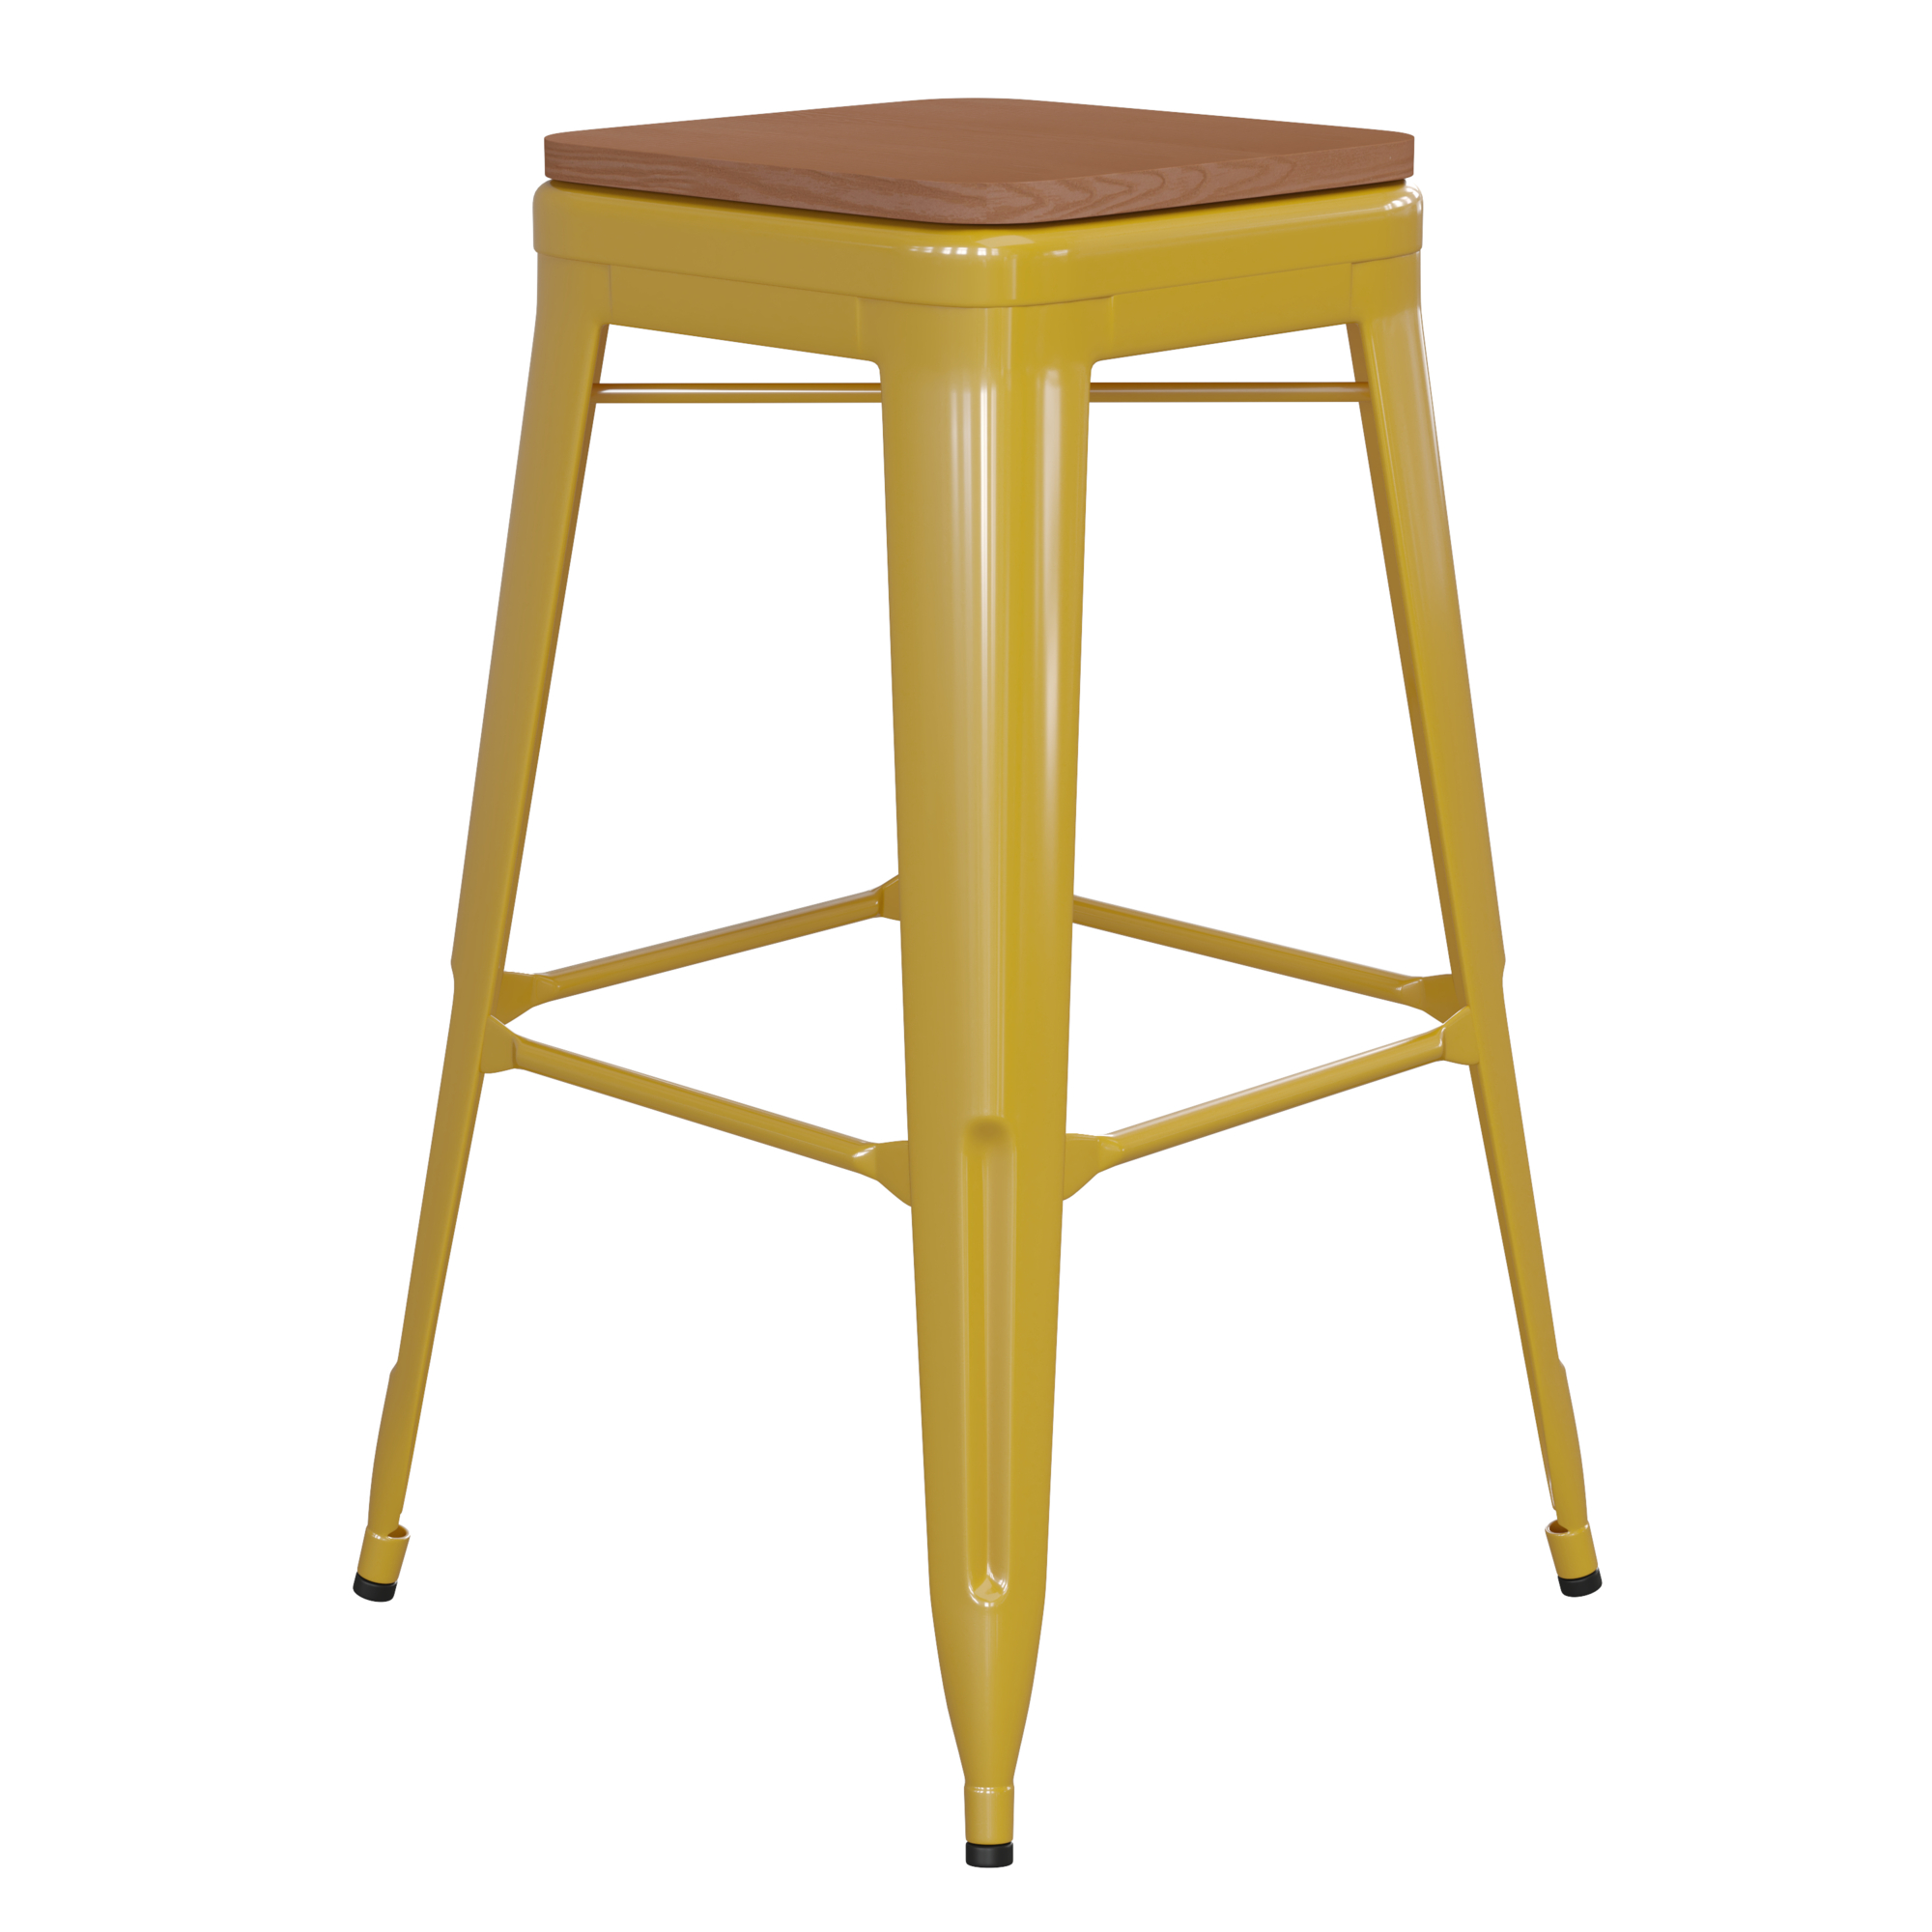 Flash Furniture, 30Inch Yellow Metal Stool-Teak Poly Seat, Primary Color Yellow, Included (qty.) 1, Model CH3132030YLPL2T